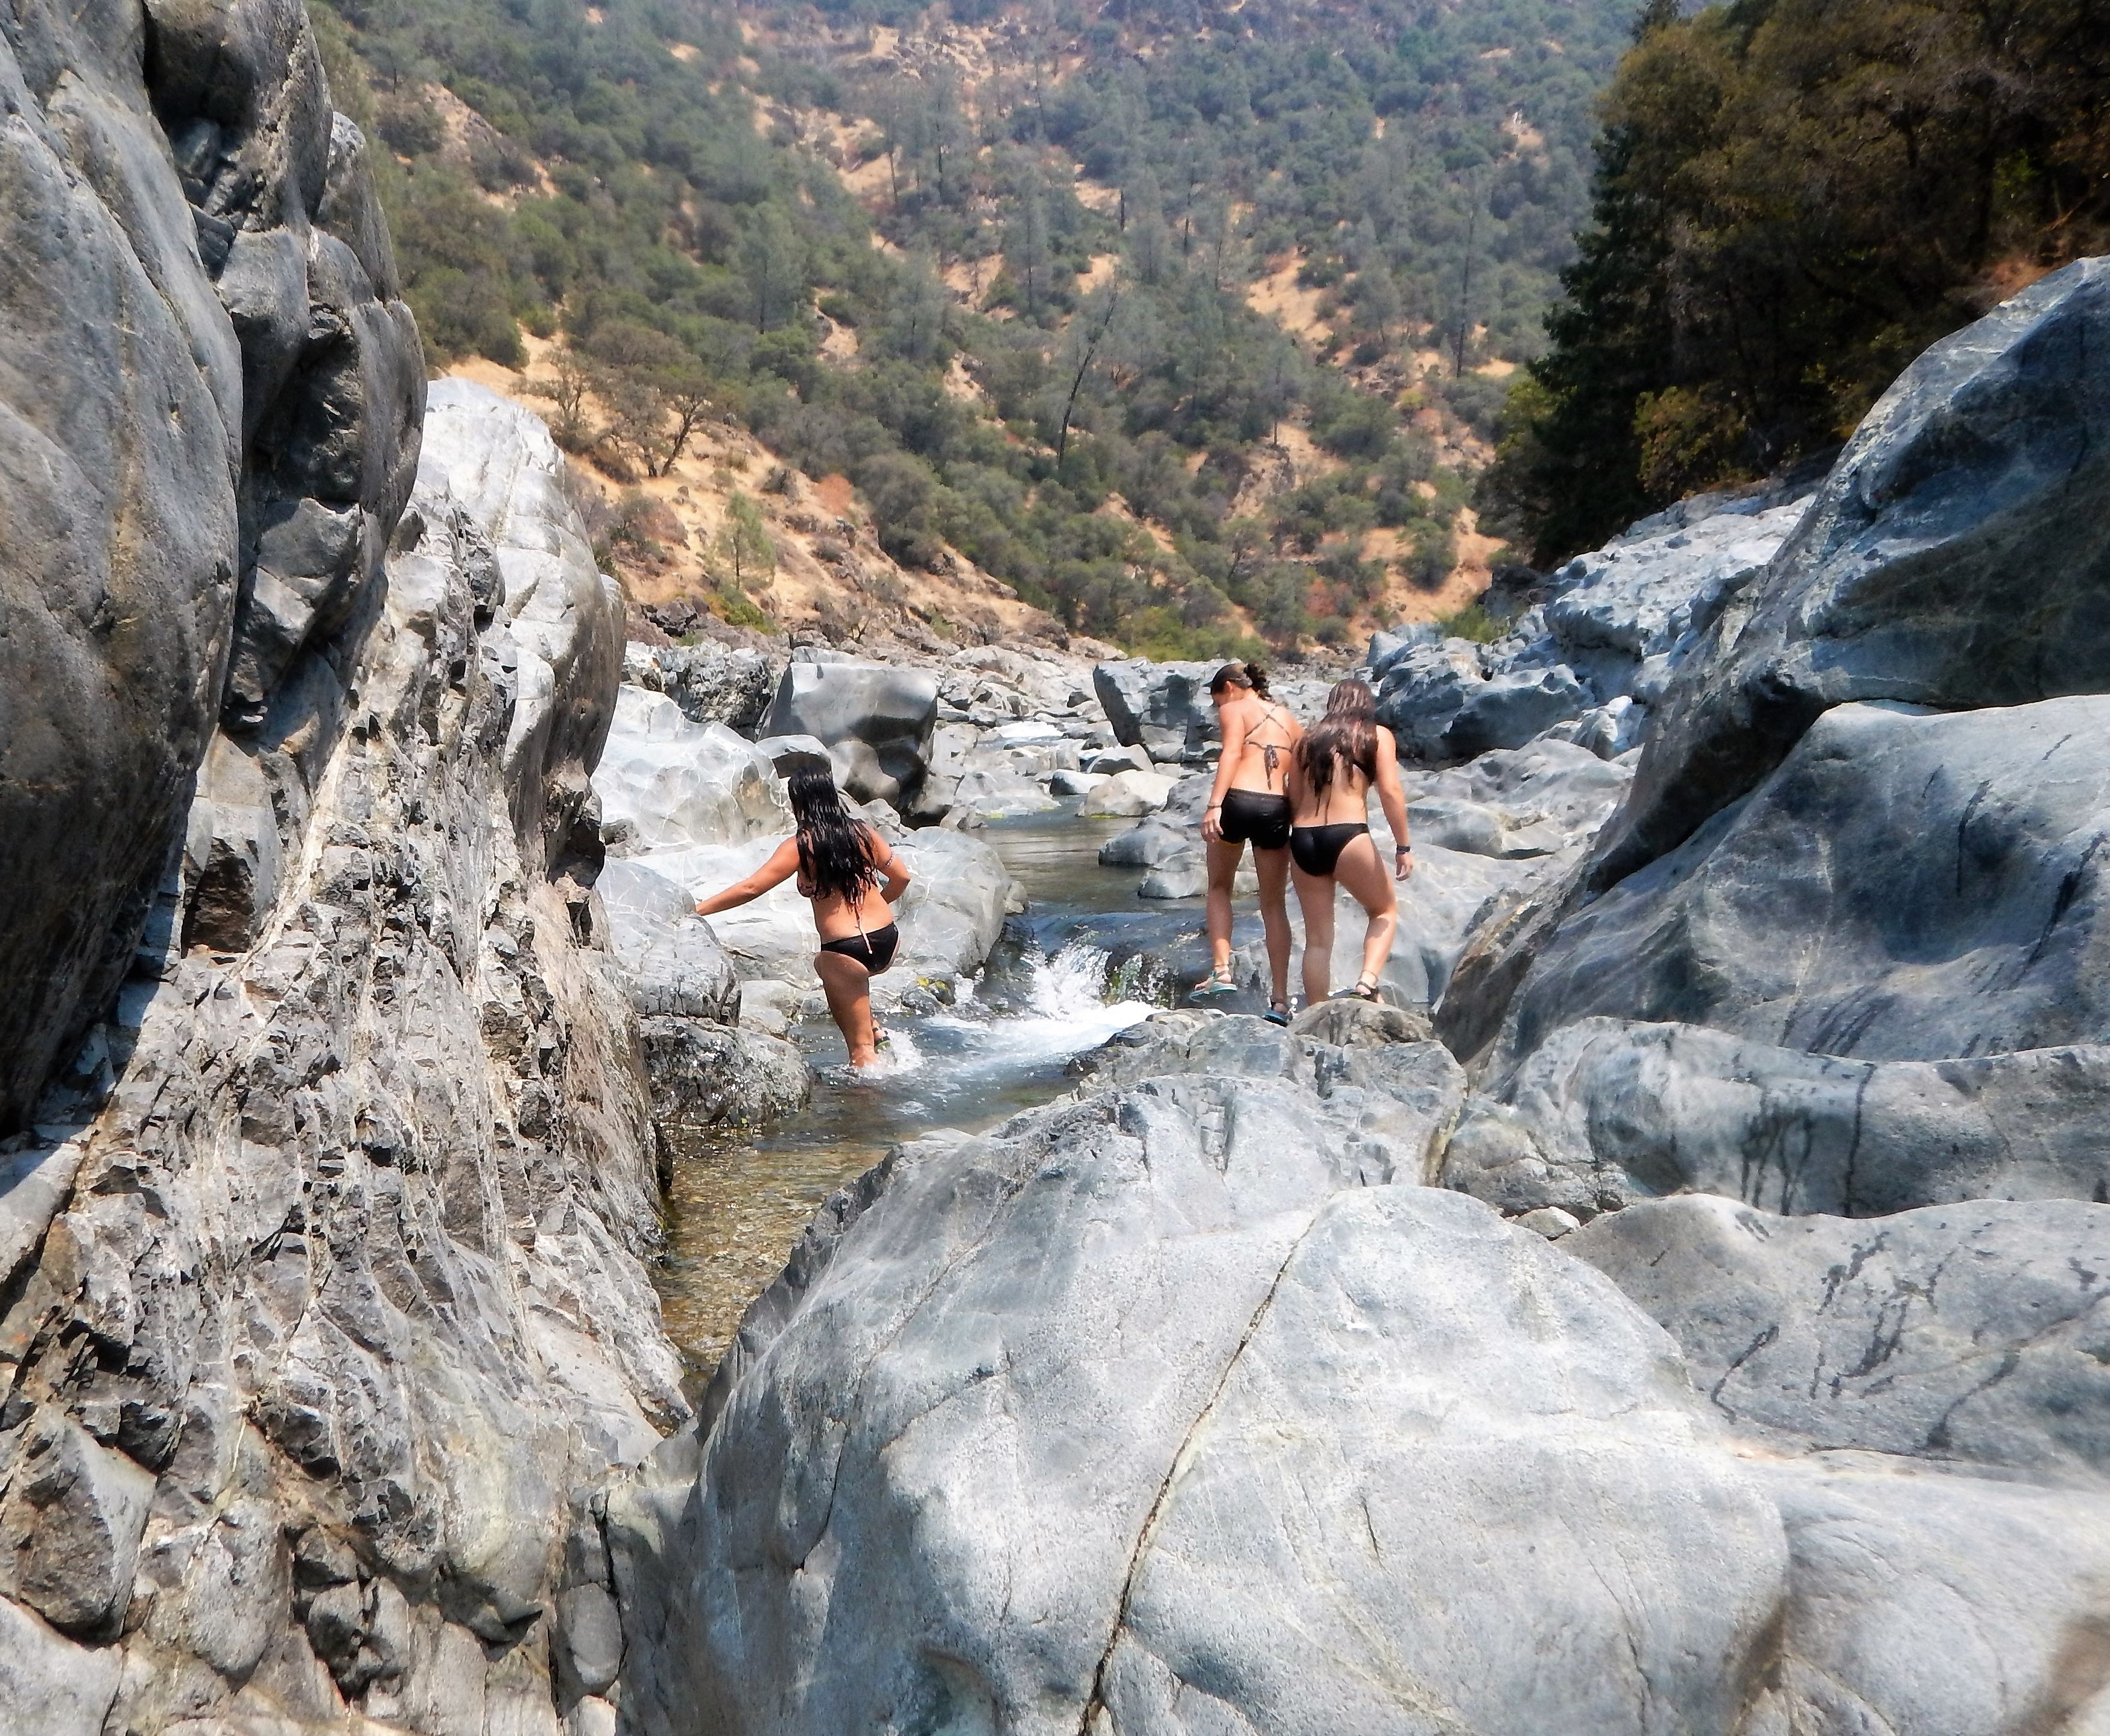 Deanna, Ella, and Emma Murchison Exploring the South Fork of the Yuba River 